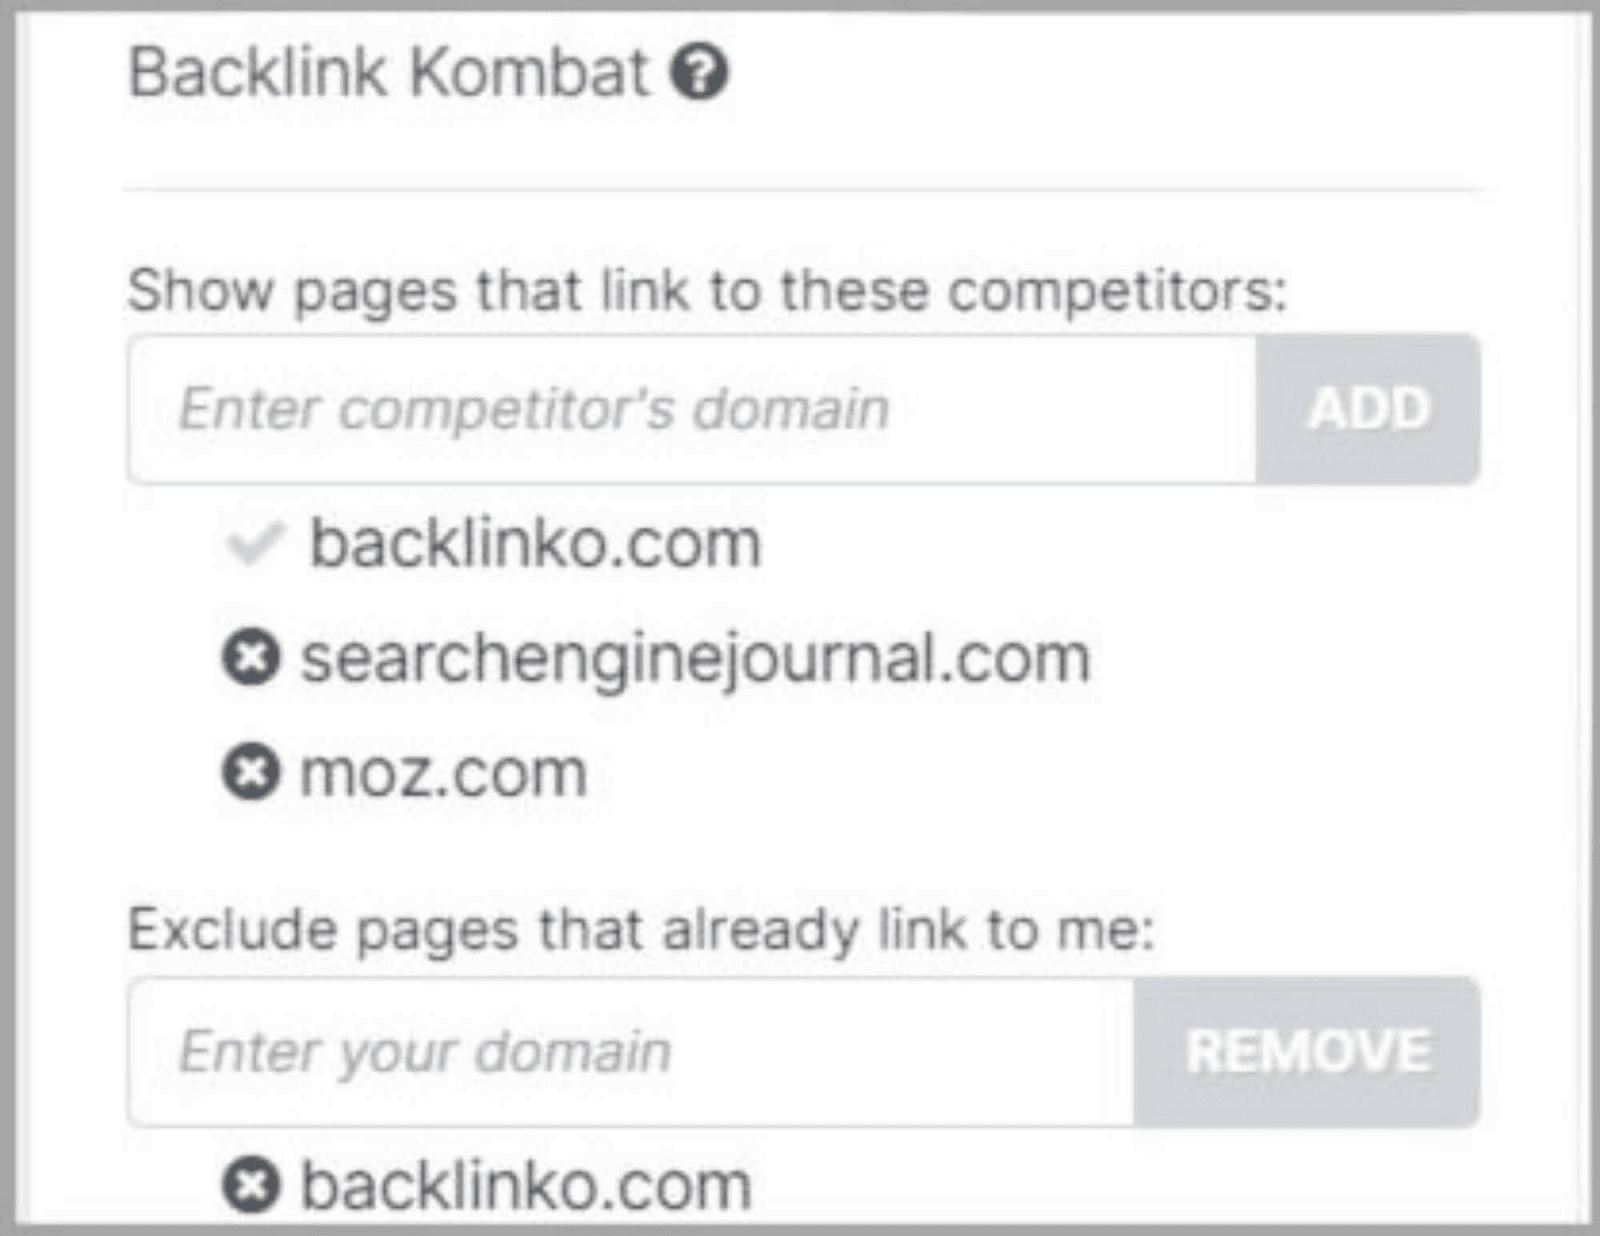 Remove your domain to see those linking to you